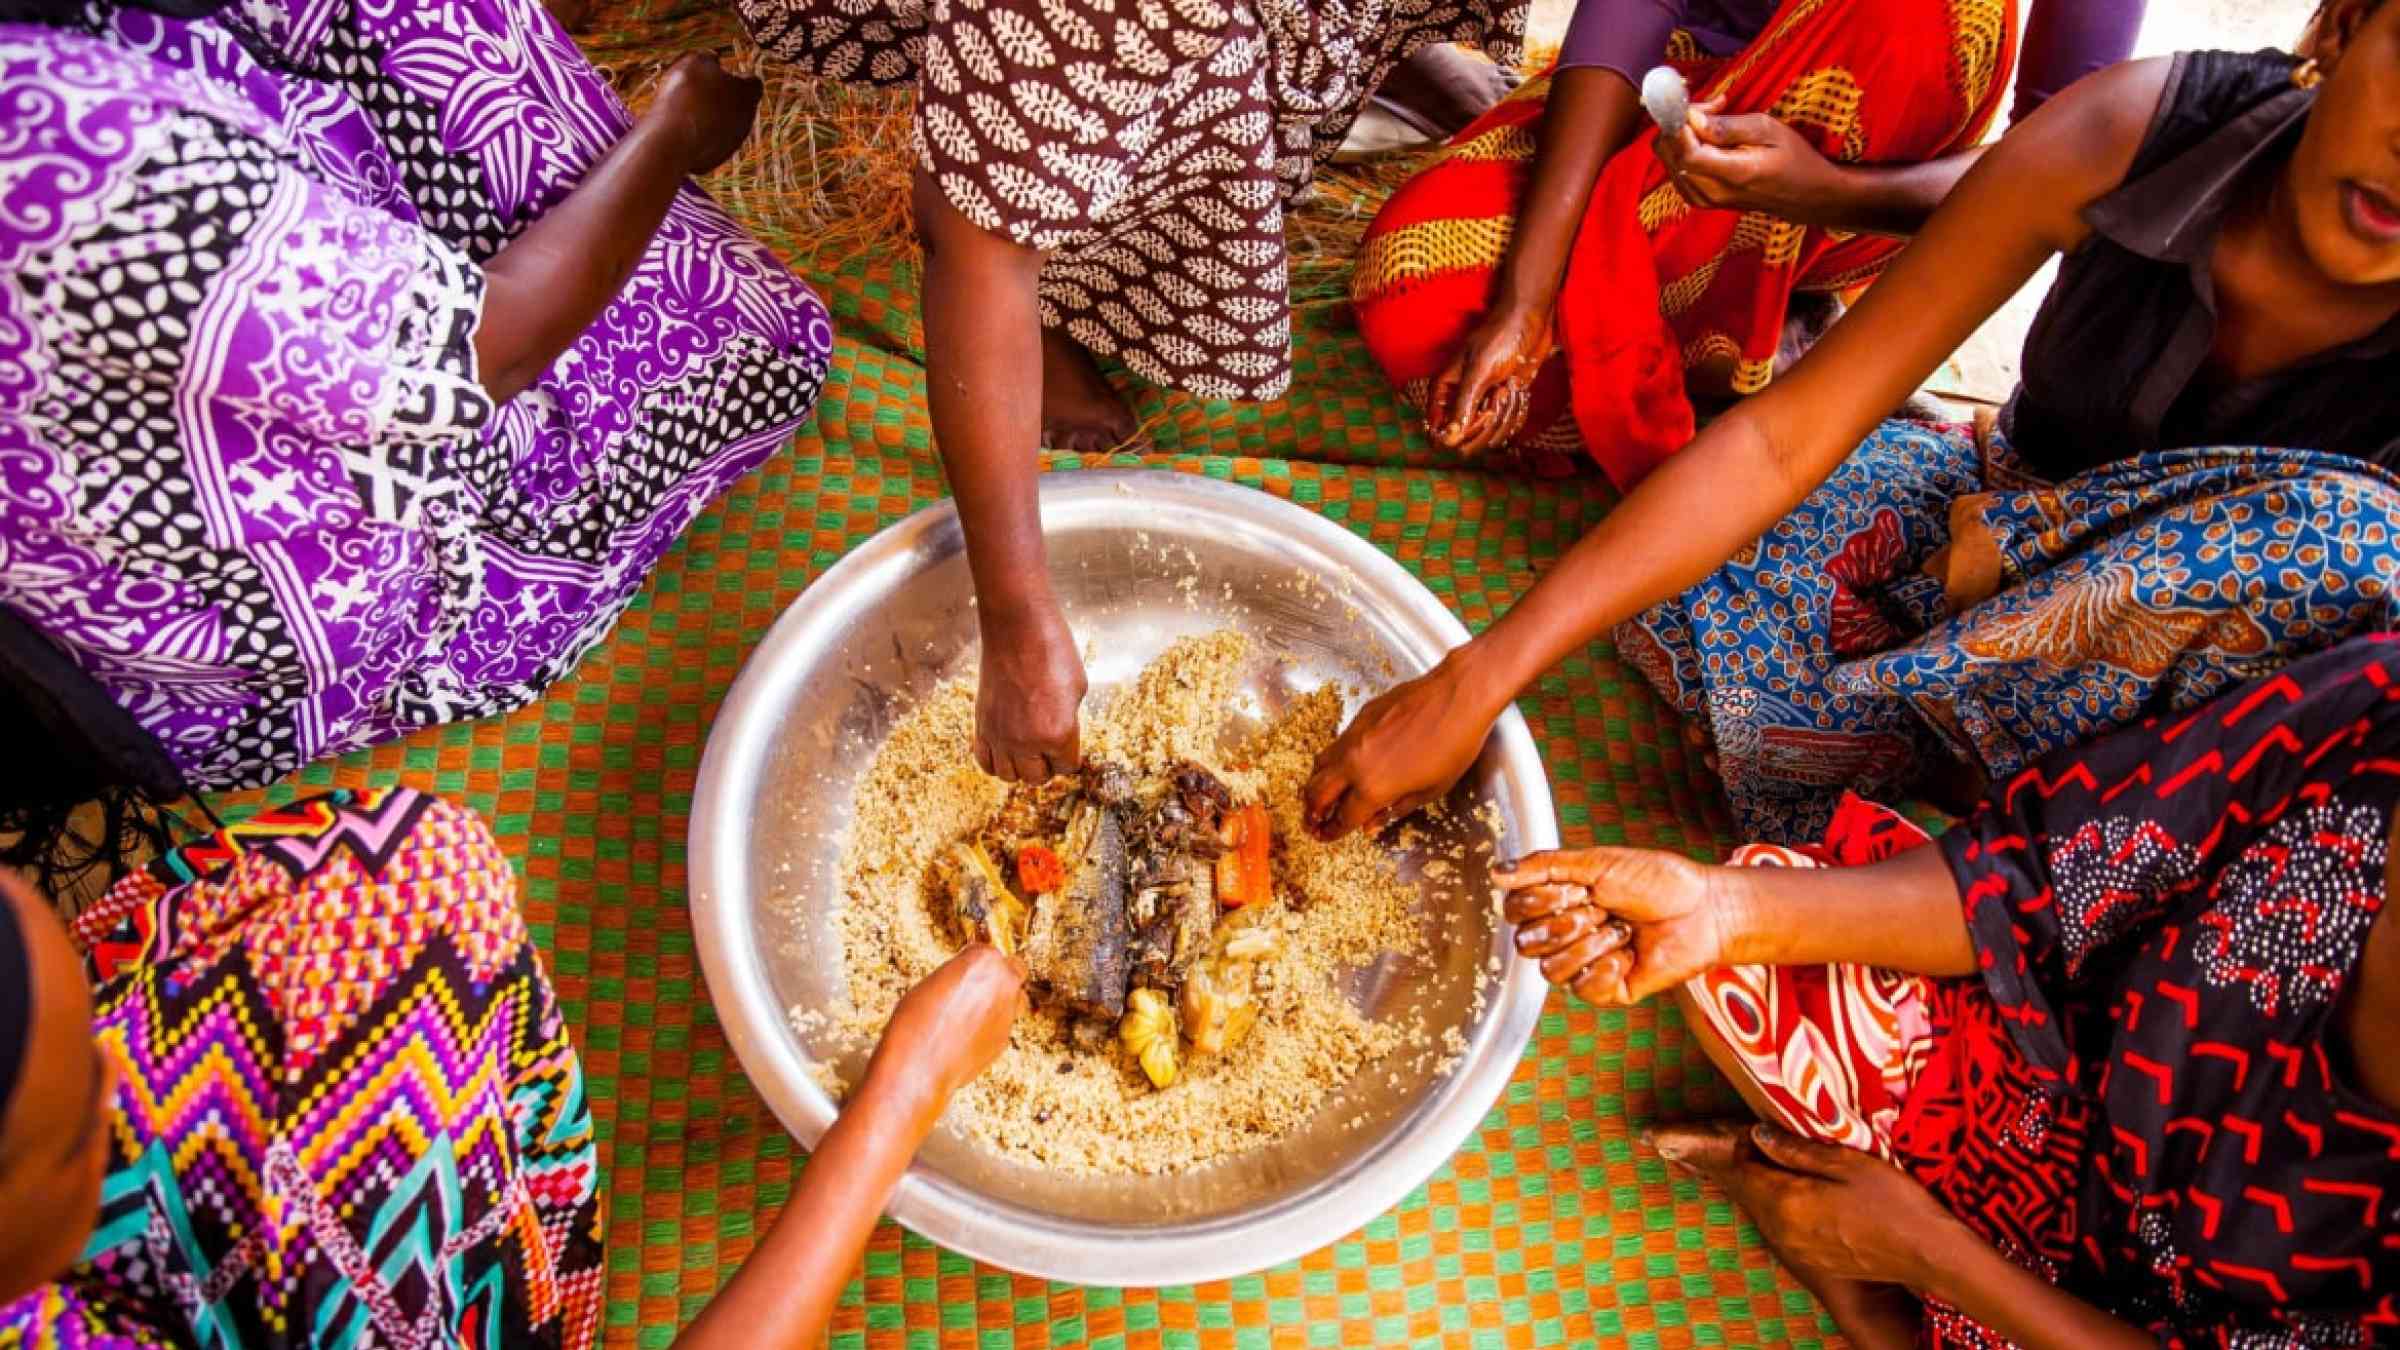 Women eating together in Senegal in the traditional manner.